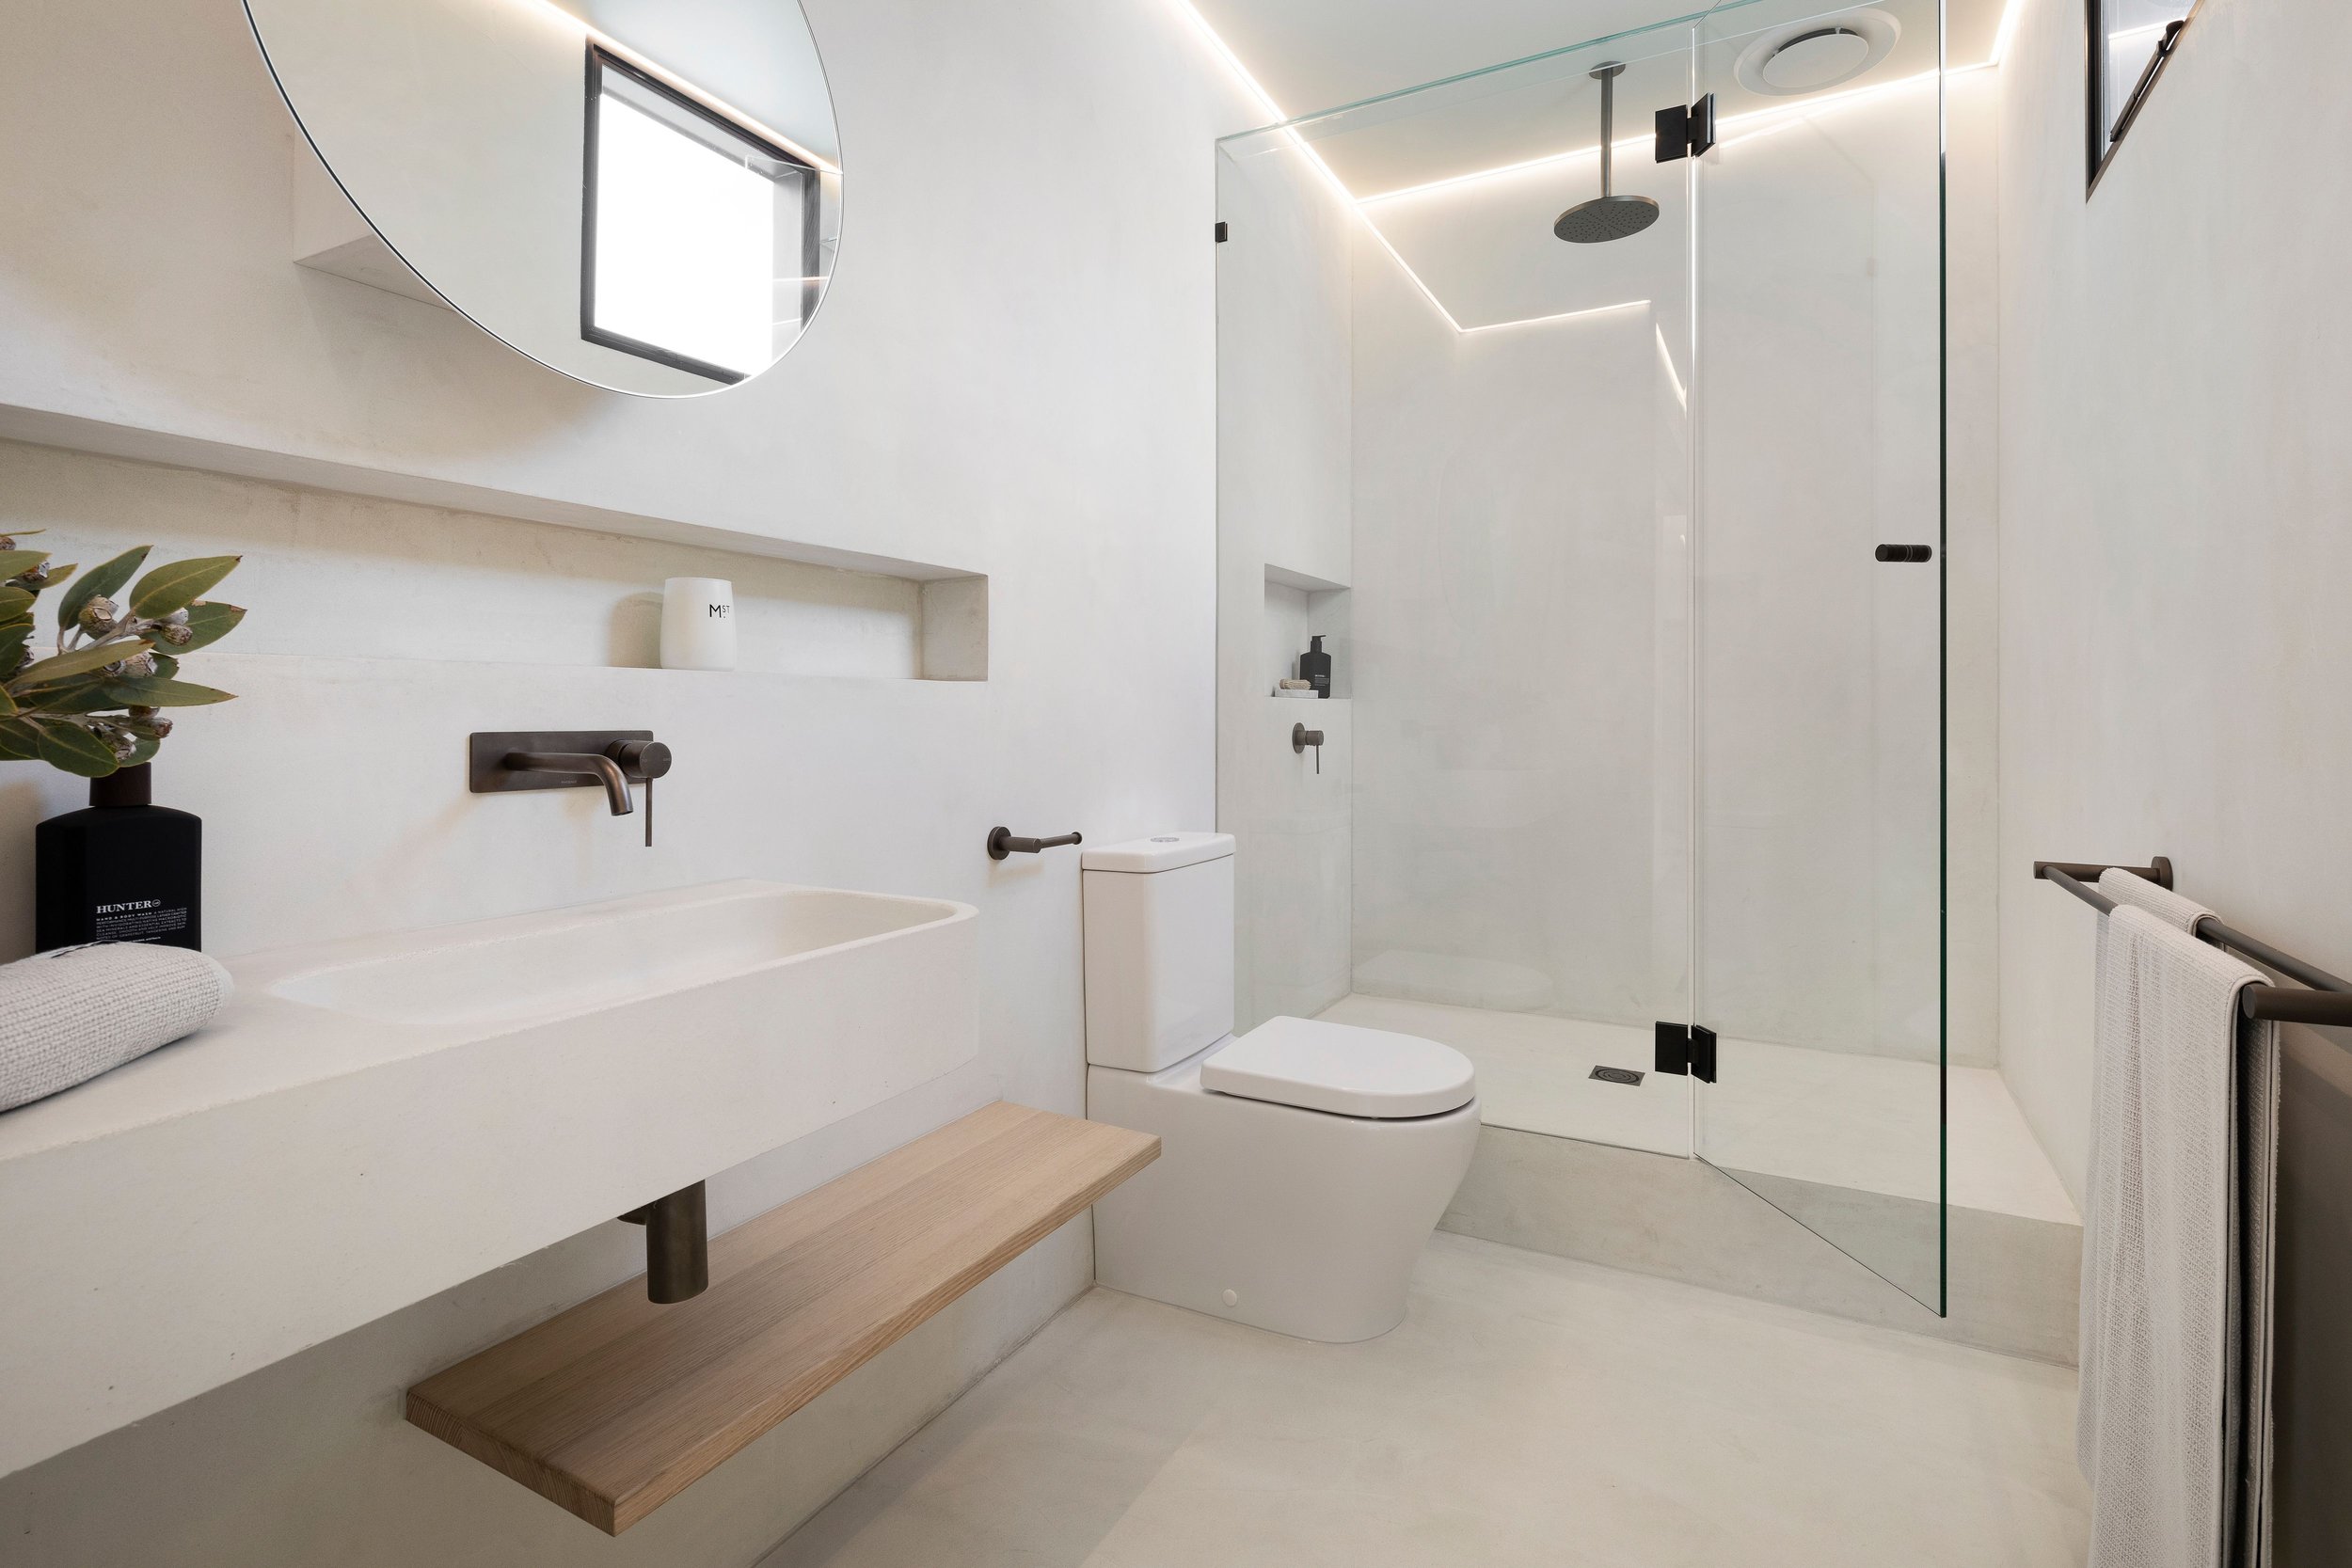 Close-up view of a modern bathroom interior featuring smooth microcement walls.